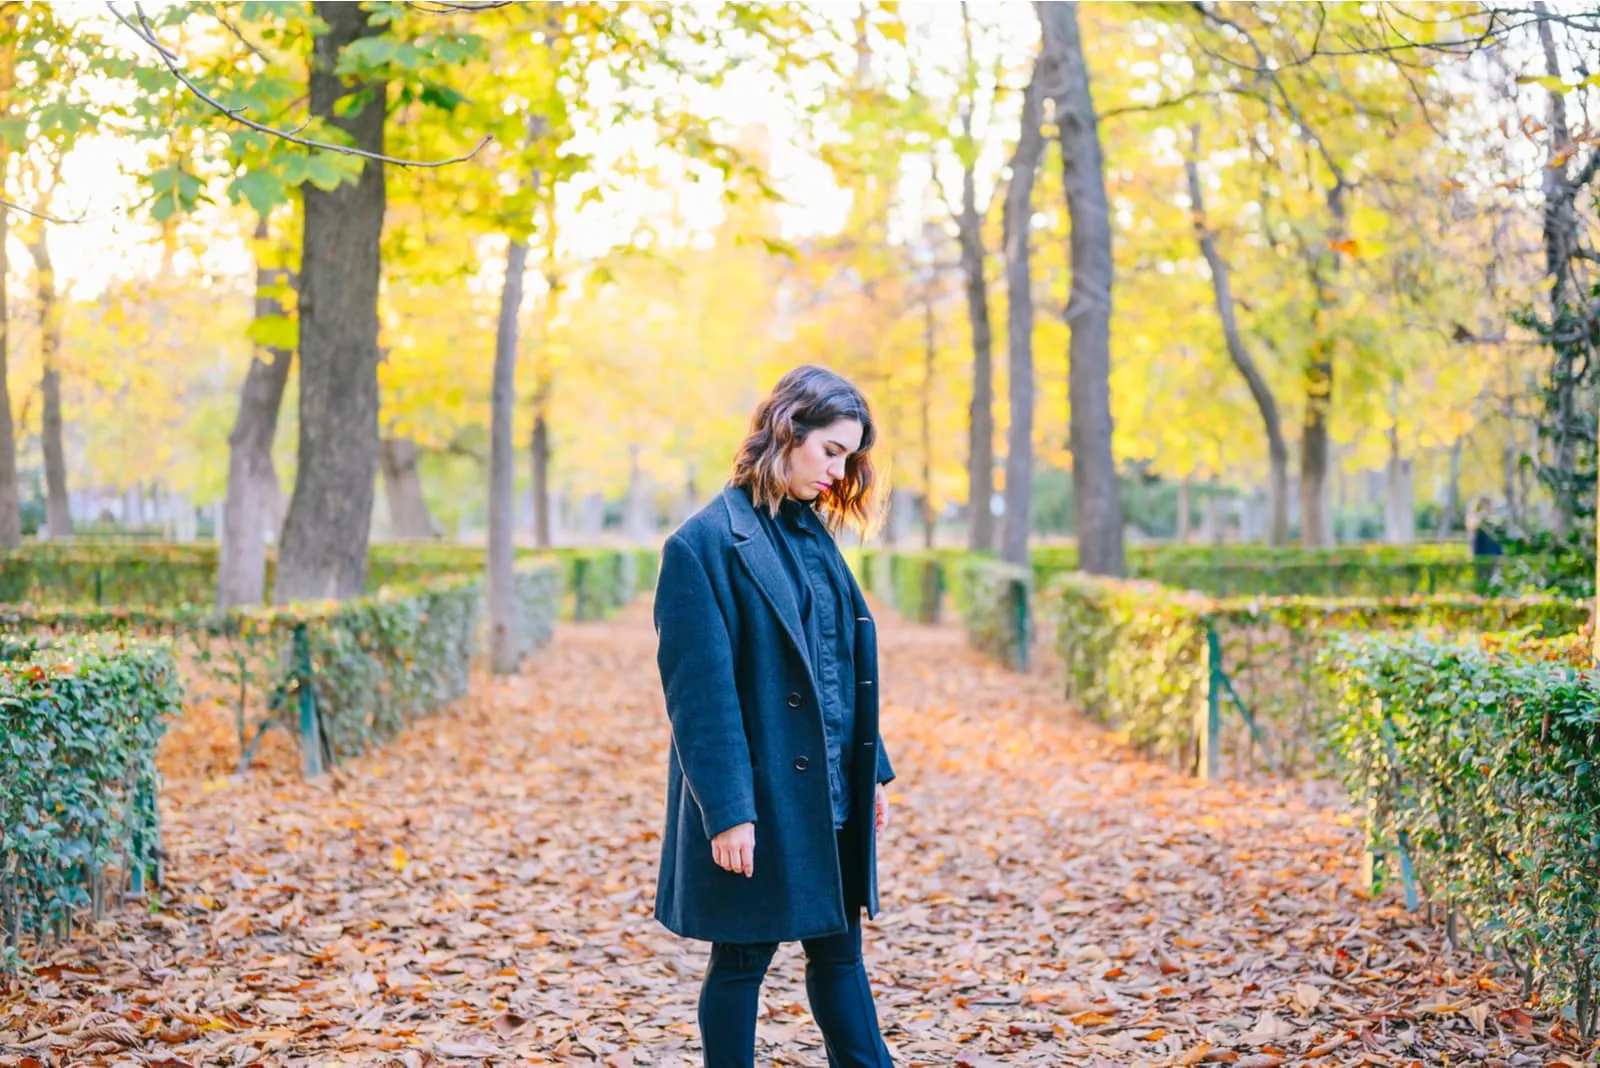 autumn in the park stands a sad woman